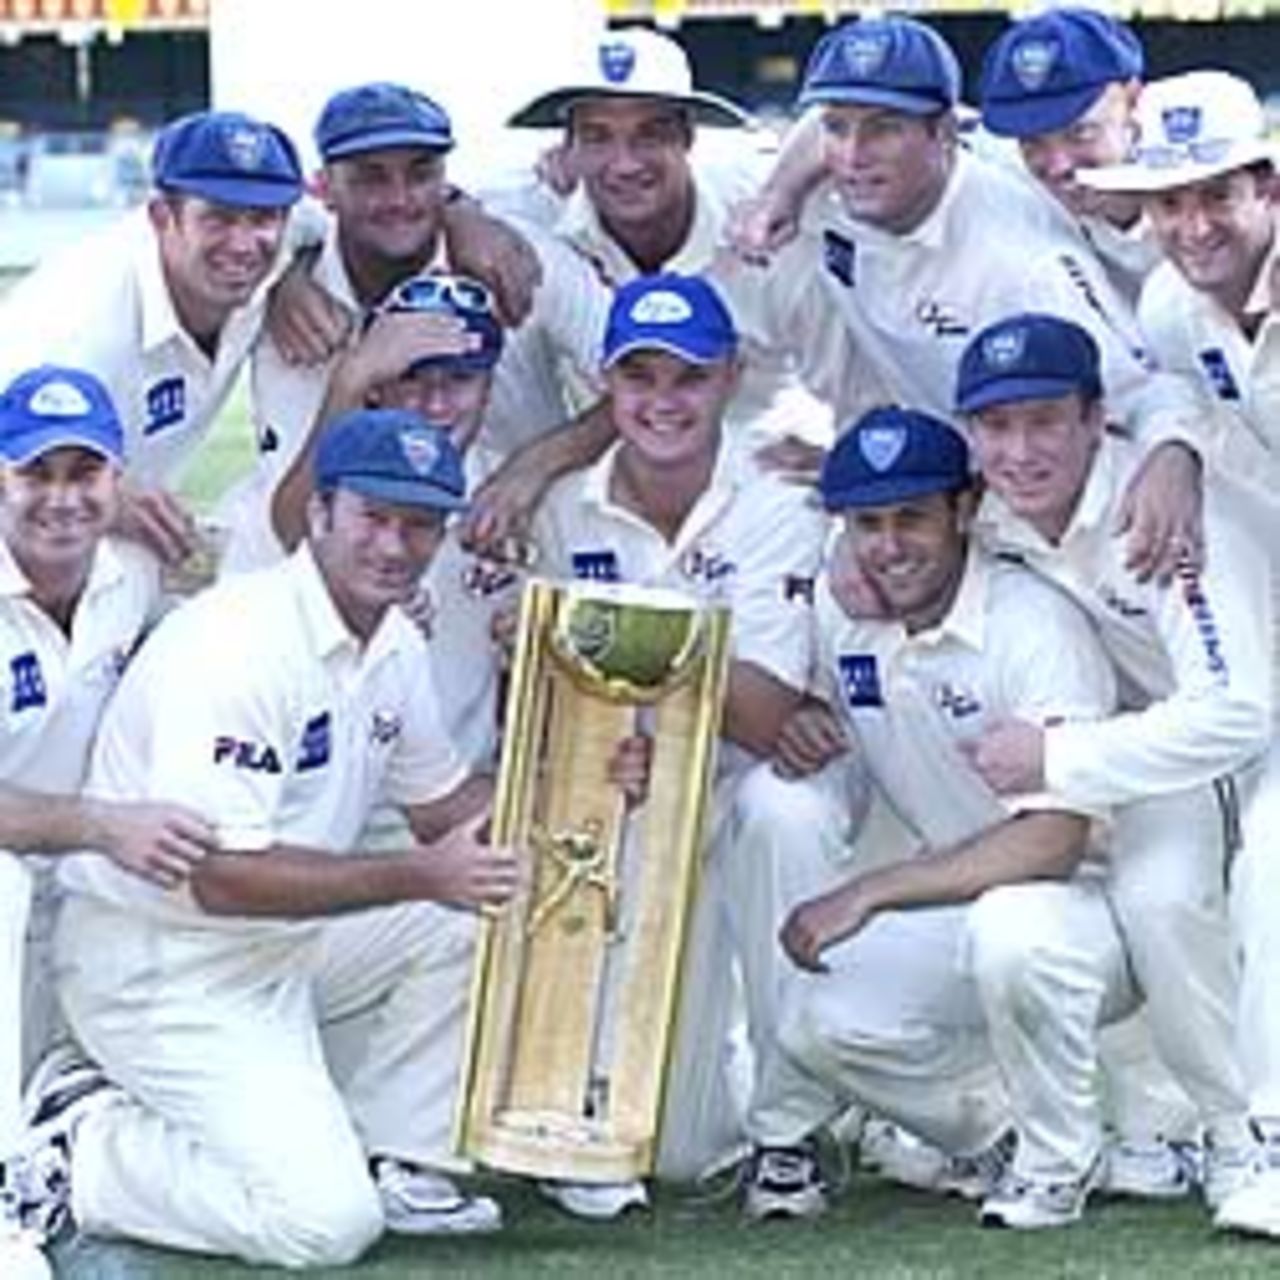 BRISBANE - MARCH 16: The Blues celebrate winning the Pura Cup against the Bulls after the third day of the Pura Cup Final between the Queensland Bulls and the New South Wales Blues at the Gabba in Brisbane, Australia on March 16, 2003.